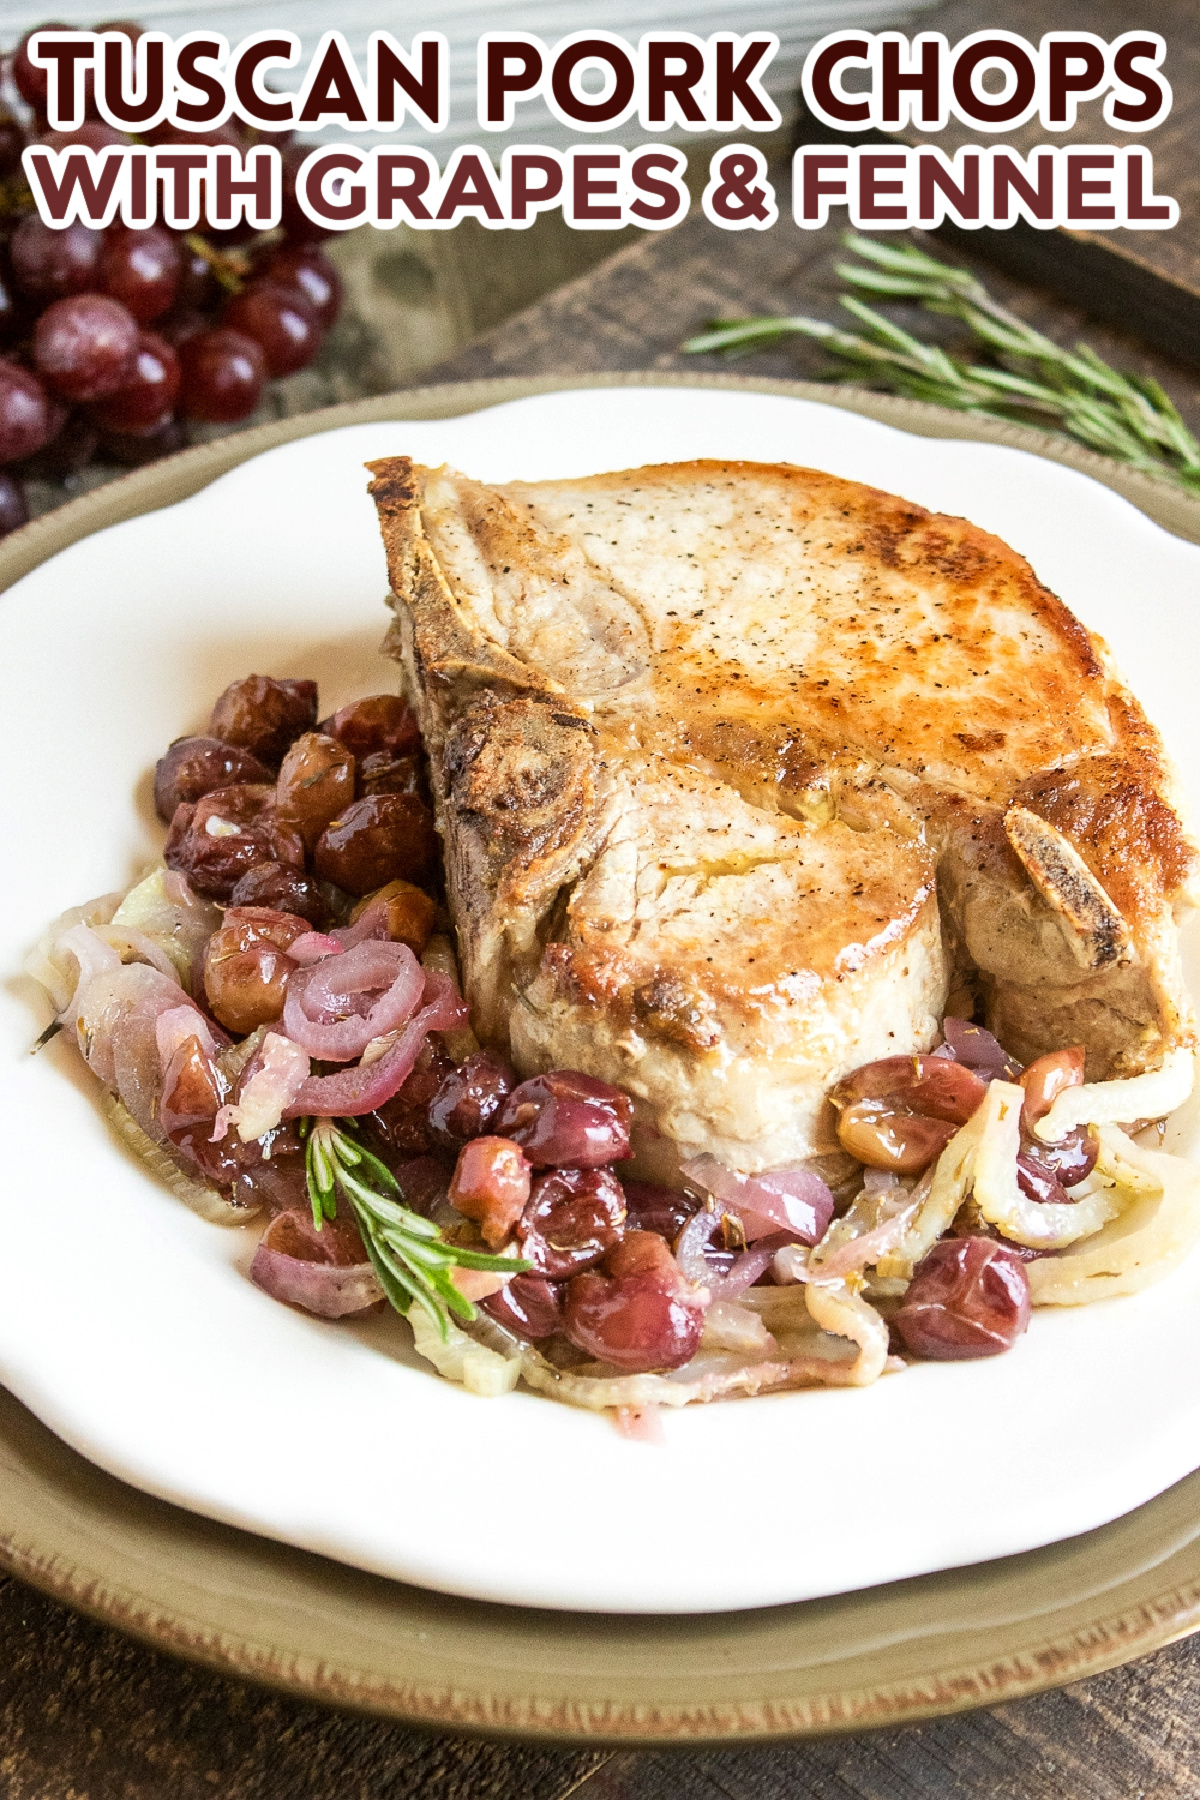 This Tuscan pork chop recipe is inspired by the flavors of Tuscany; thick pan-seared pork chops with sweet roasted grapes and earthy fennel.